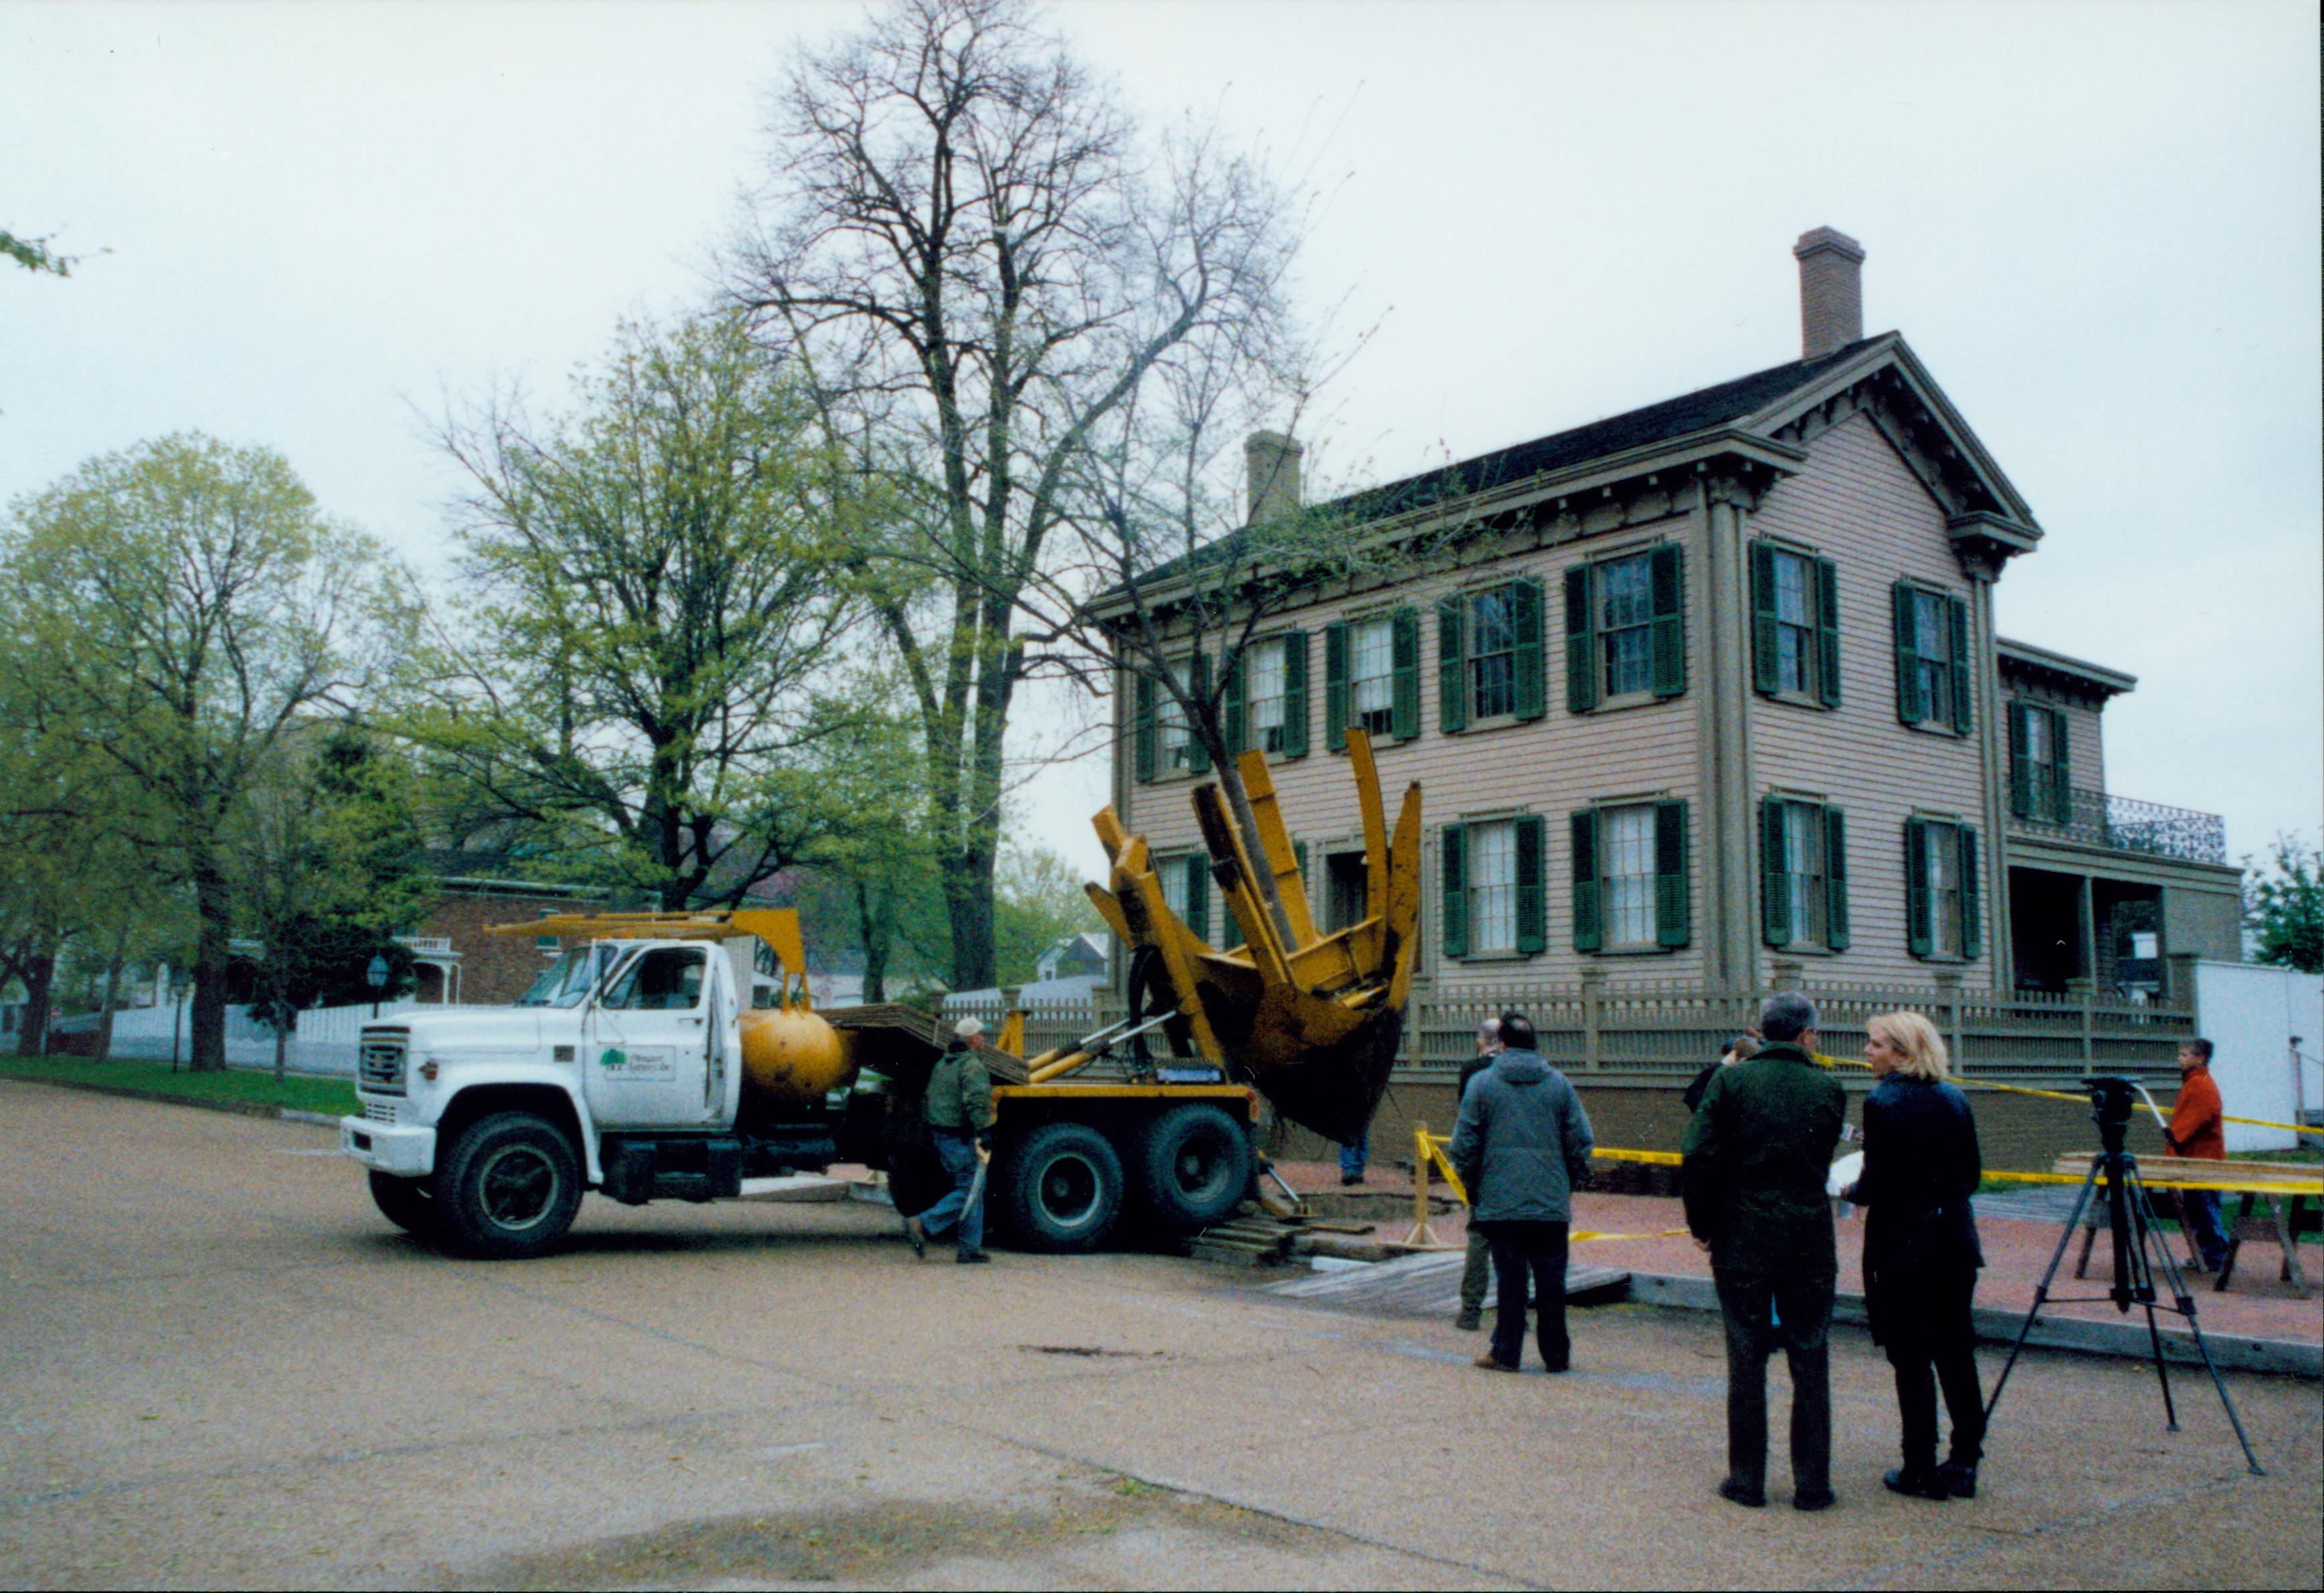 Elm tree replacement - removing tree from brick plaza in front of Lincoln Home. Superintendent Norman Hellmers speaks to reporter on right.  Pleasant Nursery staff and visitors watch. Conference Center in background far left Looking Northeast from 8th and Jackson Street intersection Elm tree, Lincoln Home, Conference Center, contractors, staff, reporters, brick plaza, Pleasant Nursery